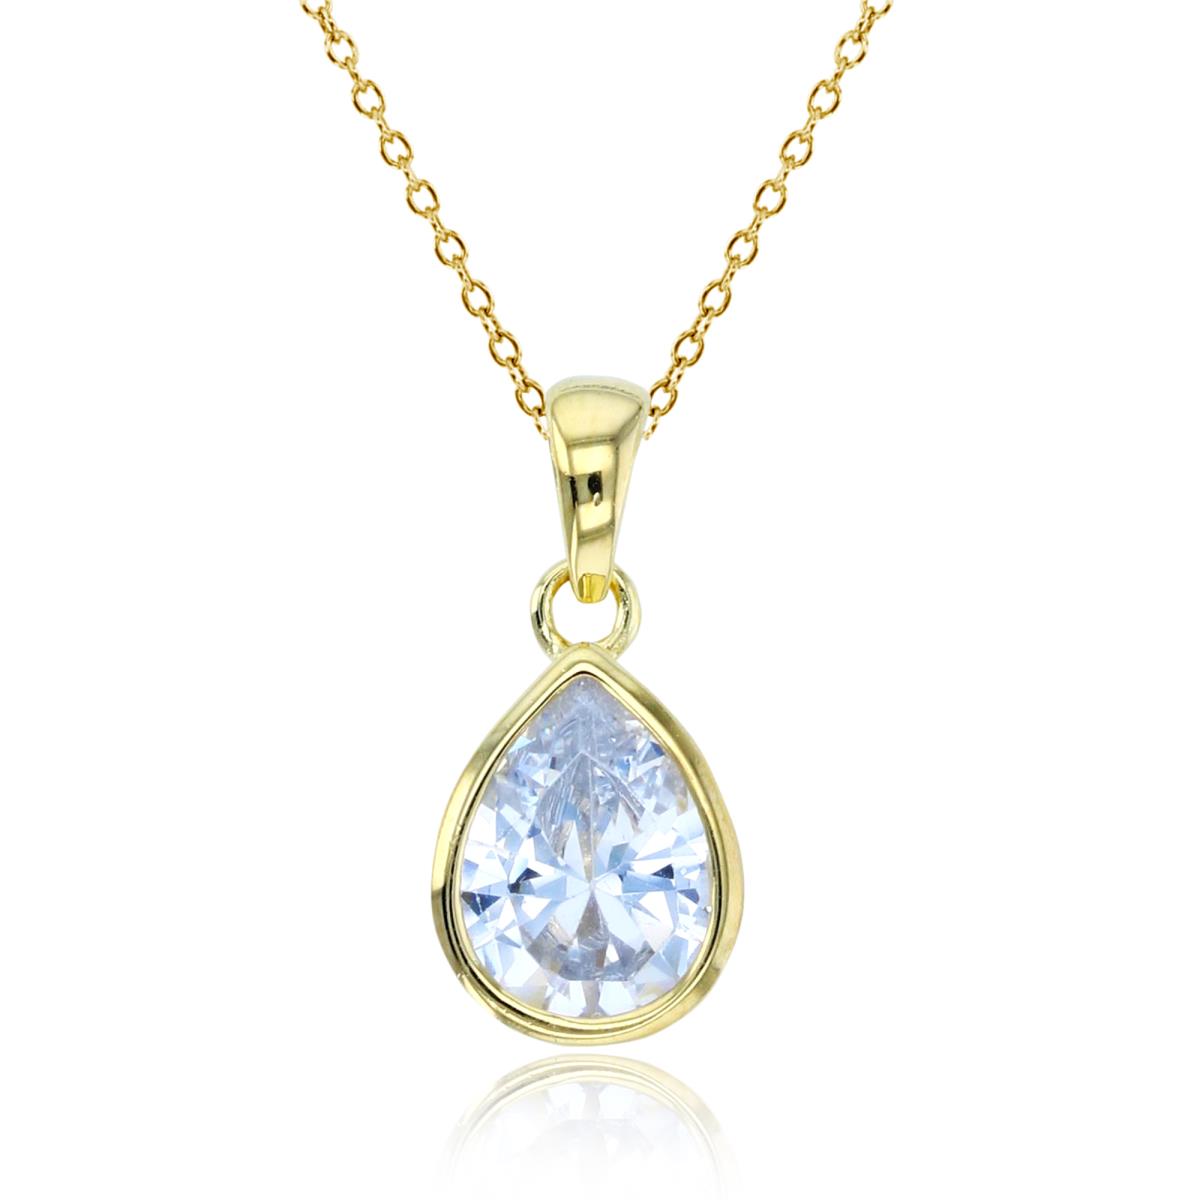 Sterling Silver+1Micron Yellow Gold 8x6mm PS CZ Bezel Pear-shape 18"Necklace